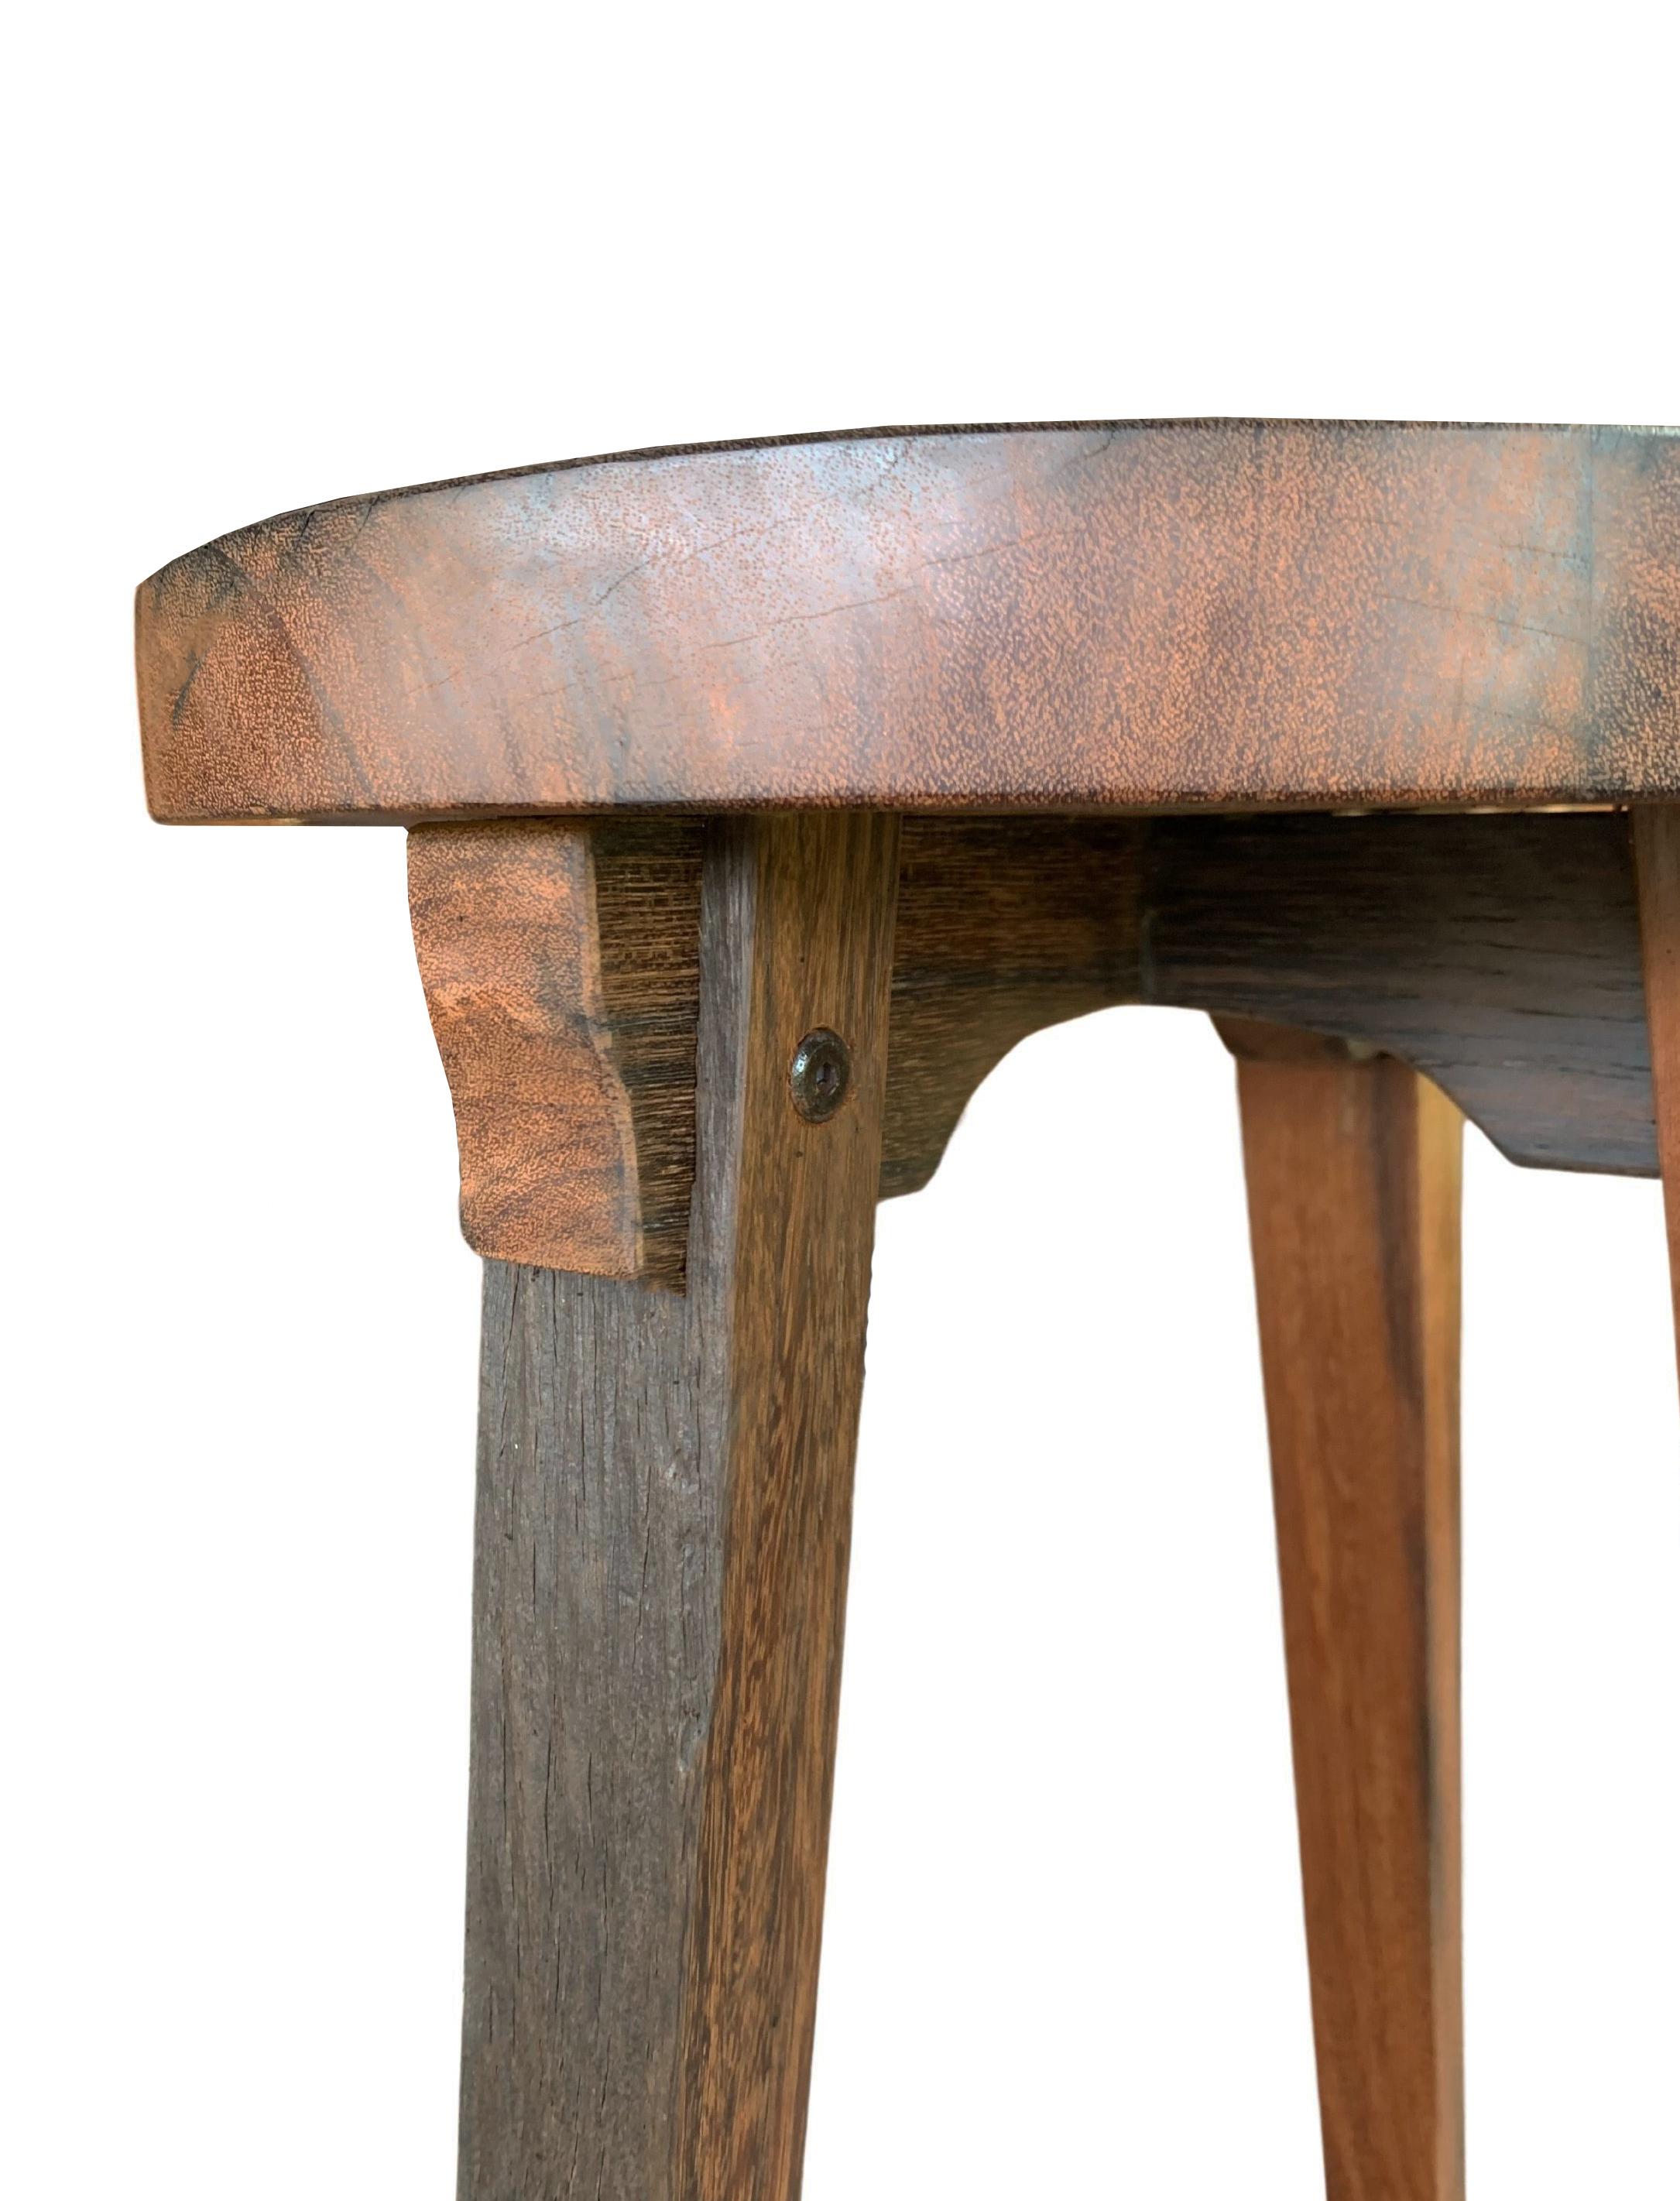 Organic Modern Ironwood Stool Modern Organic, Hand Crafted with Artisanal Wood Joinery For Sale